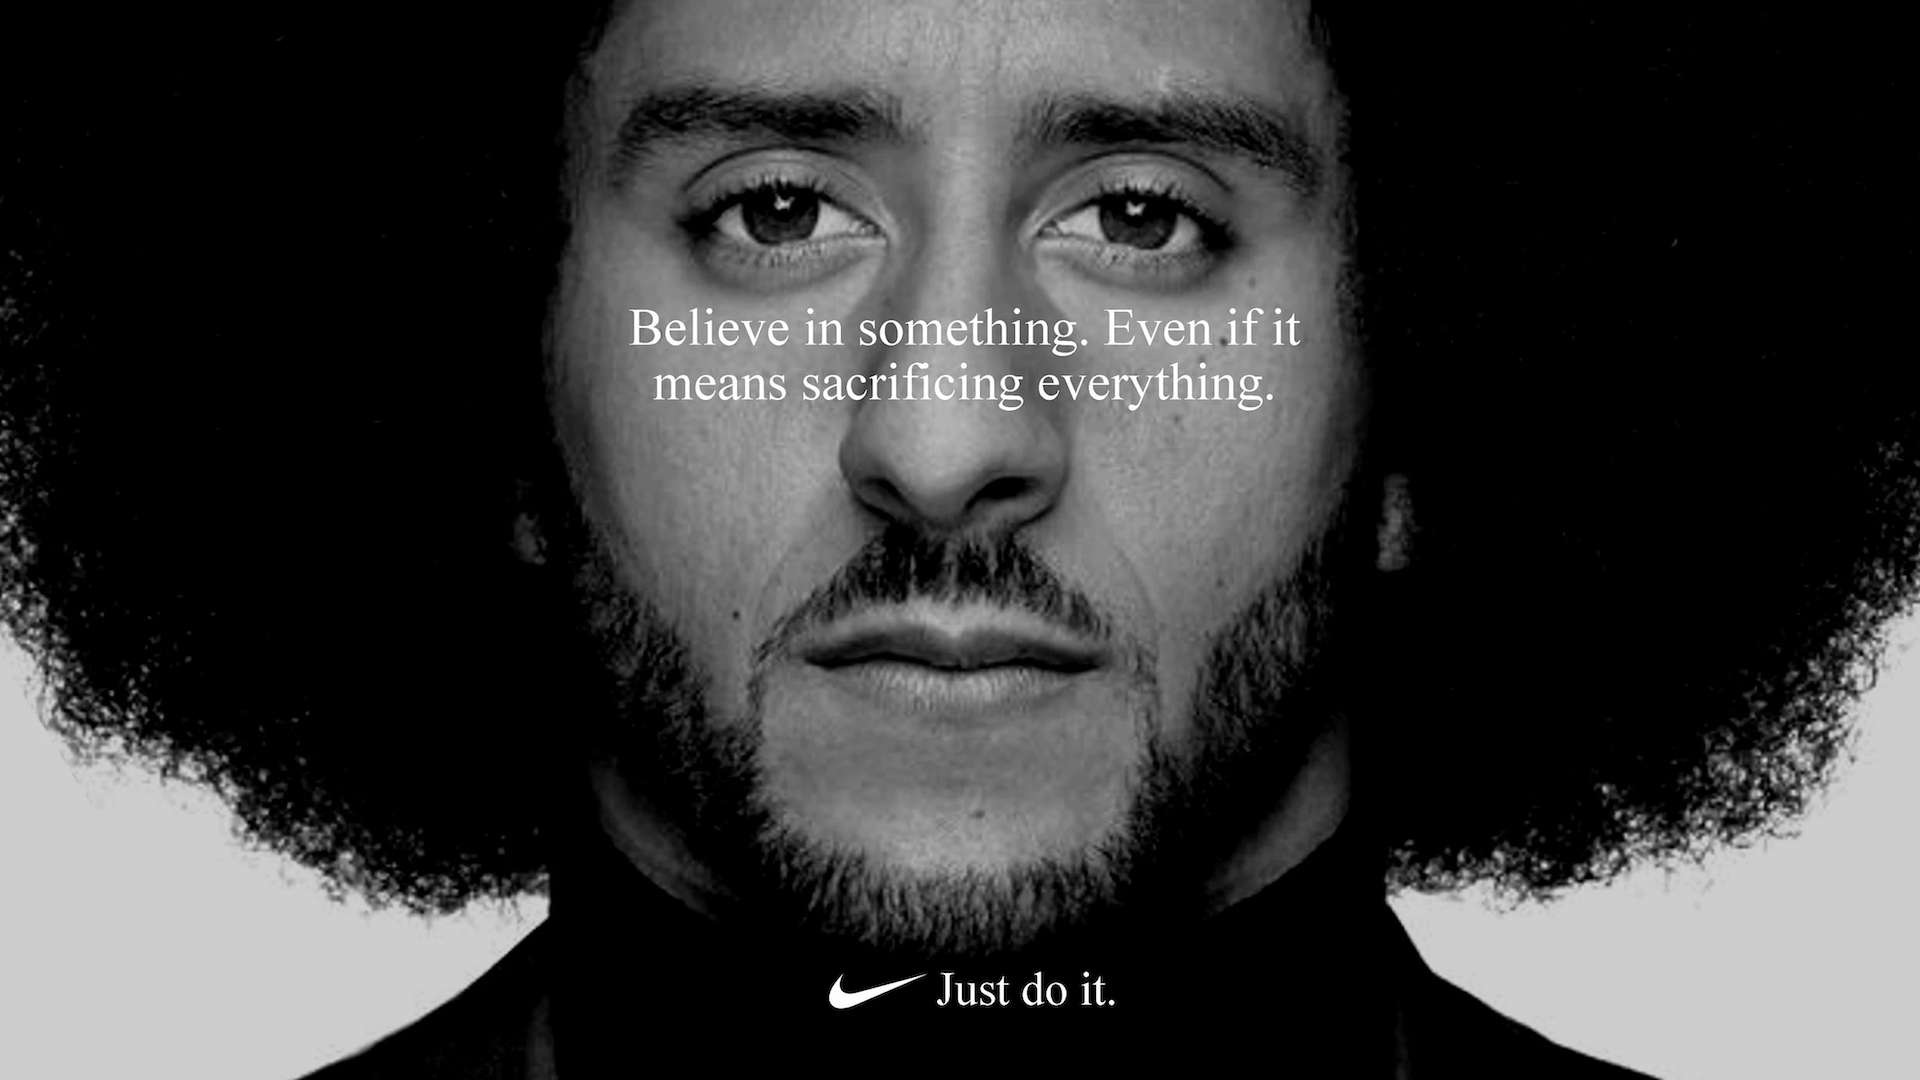 Nike's campaign with Colin Kapernick